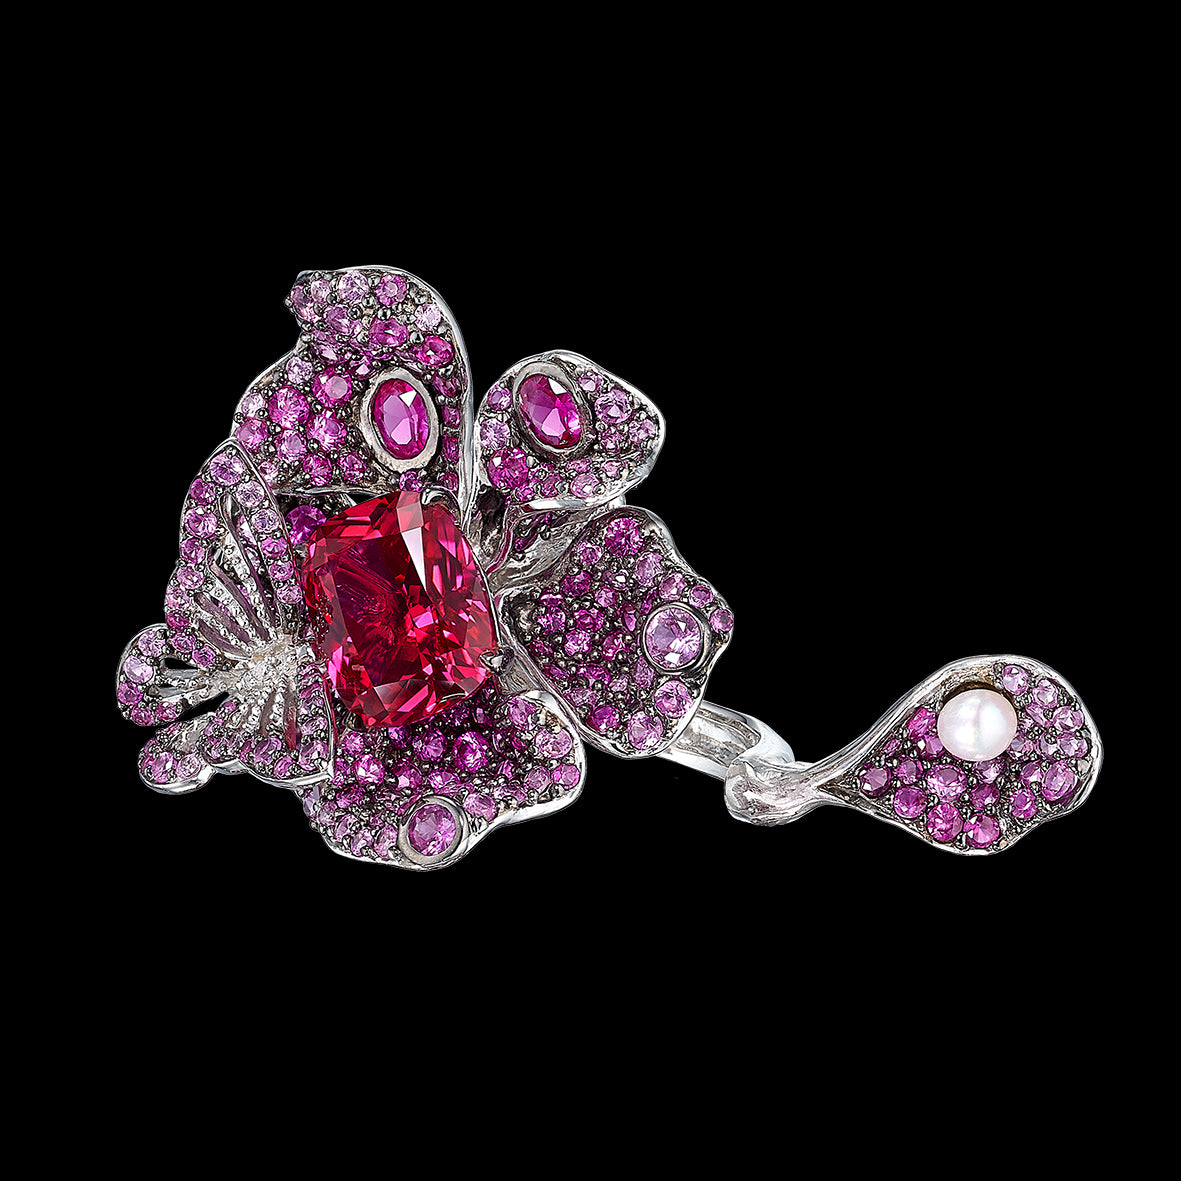 Ruby Peony Butterfly Ring, Ring, Anabela Chan Joaillerie - Fine jewelry with laboratory grown and created gemstones hand-crafted in the United Kingdom. Anabela Chan Joaillerie is the first fine jewellery brand in the world to champion laboratory-grown and created gemstones with high jewellery design, artisanal craftsmanship and a focus on ethical and sustainable innovations.